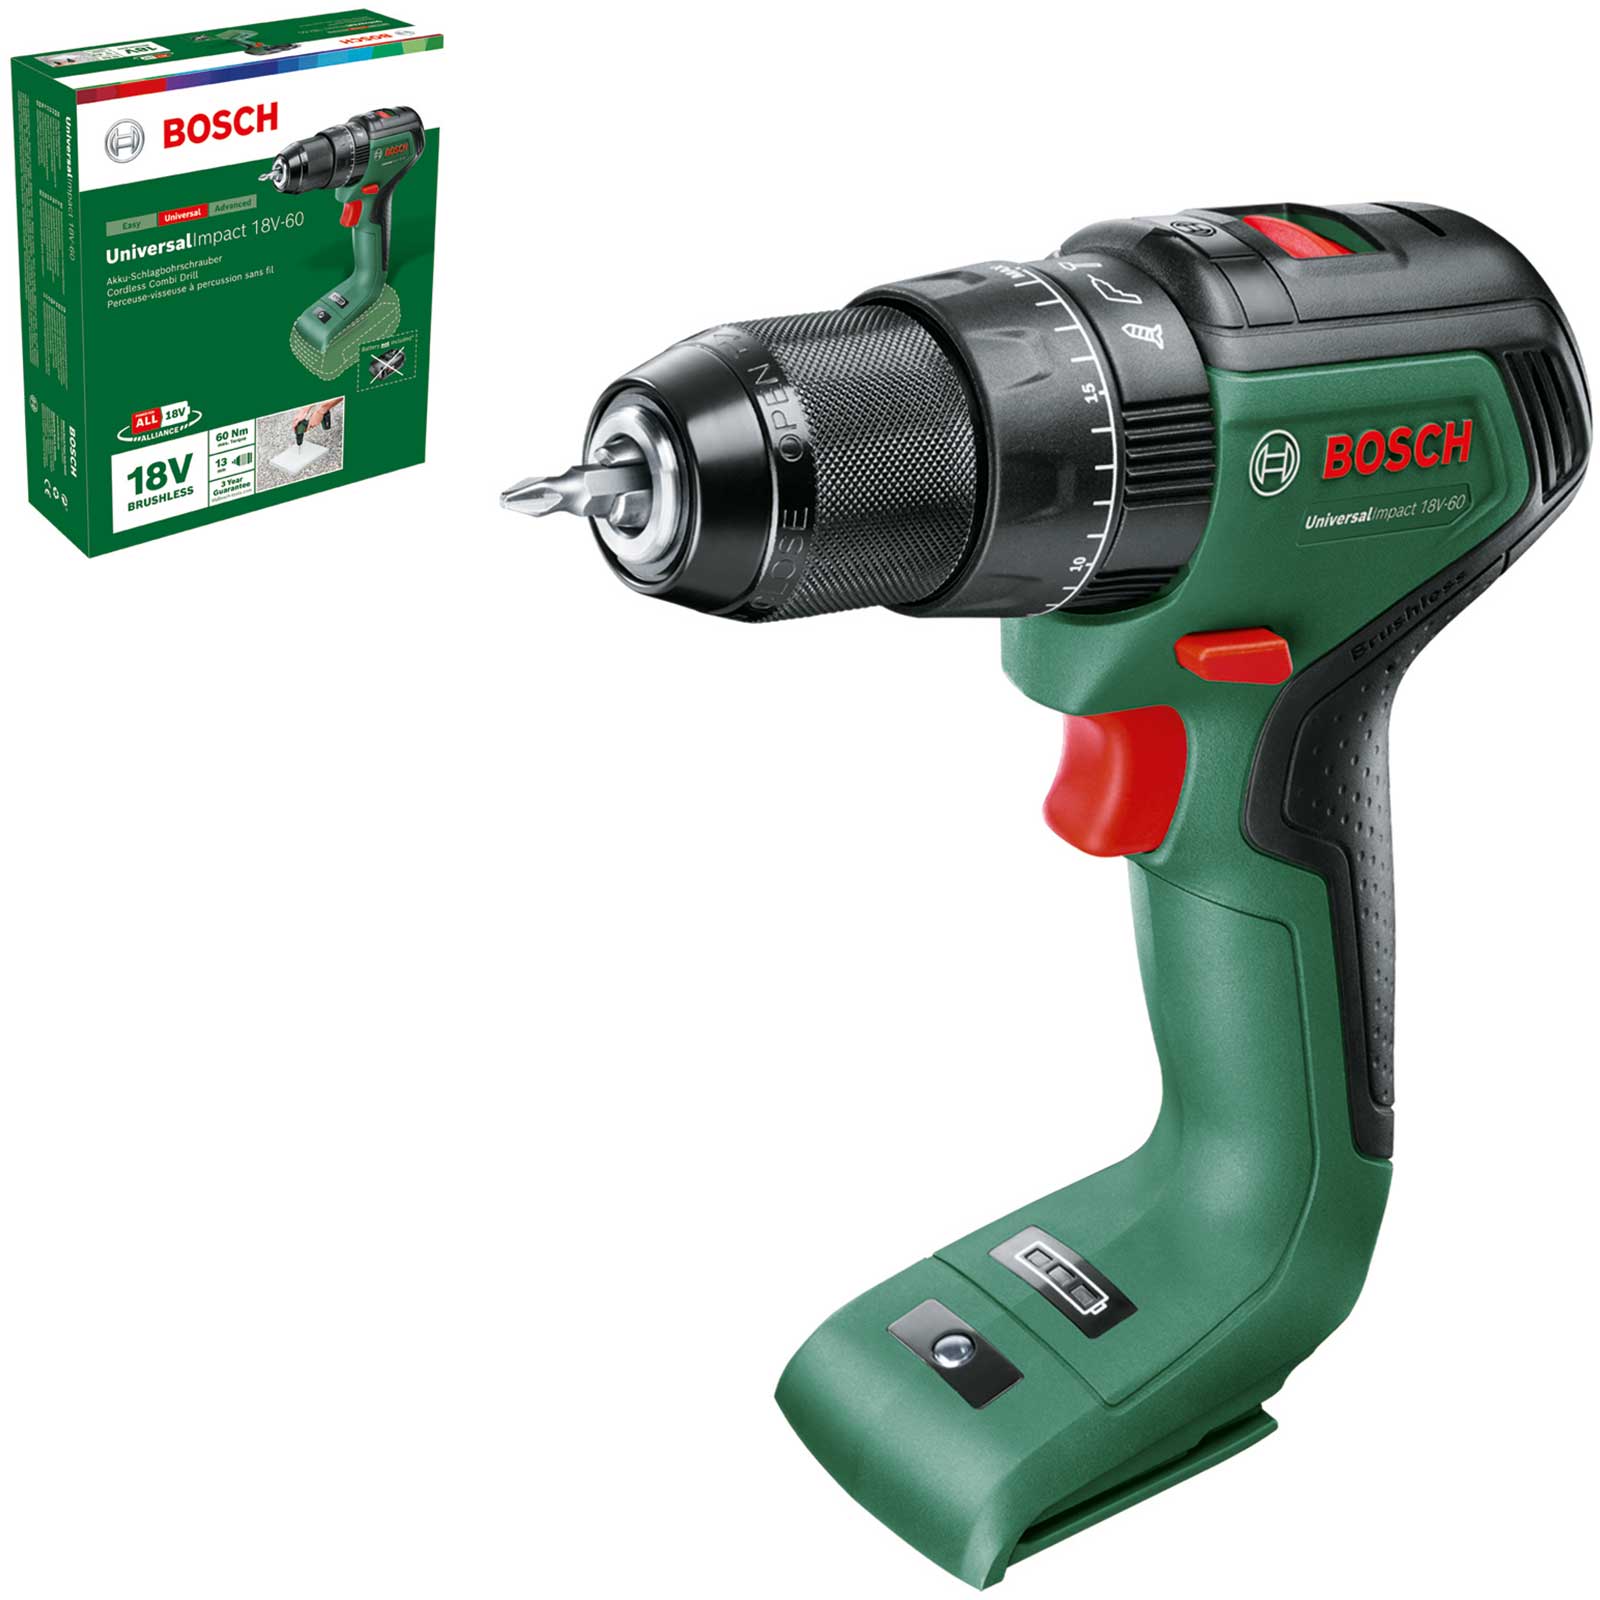 Image of Bosch UNIVERSALIMPACT 18V-60 18v Cordless Brushless Combi Drill No Batteries No Charger No Case